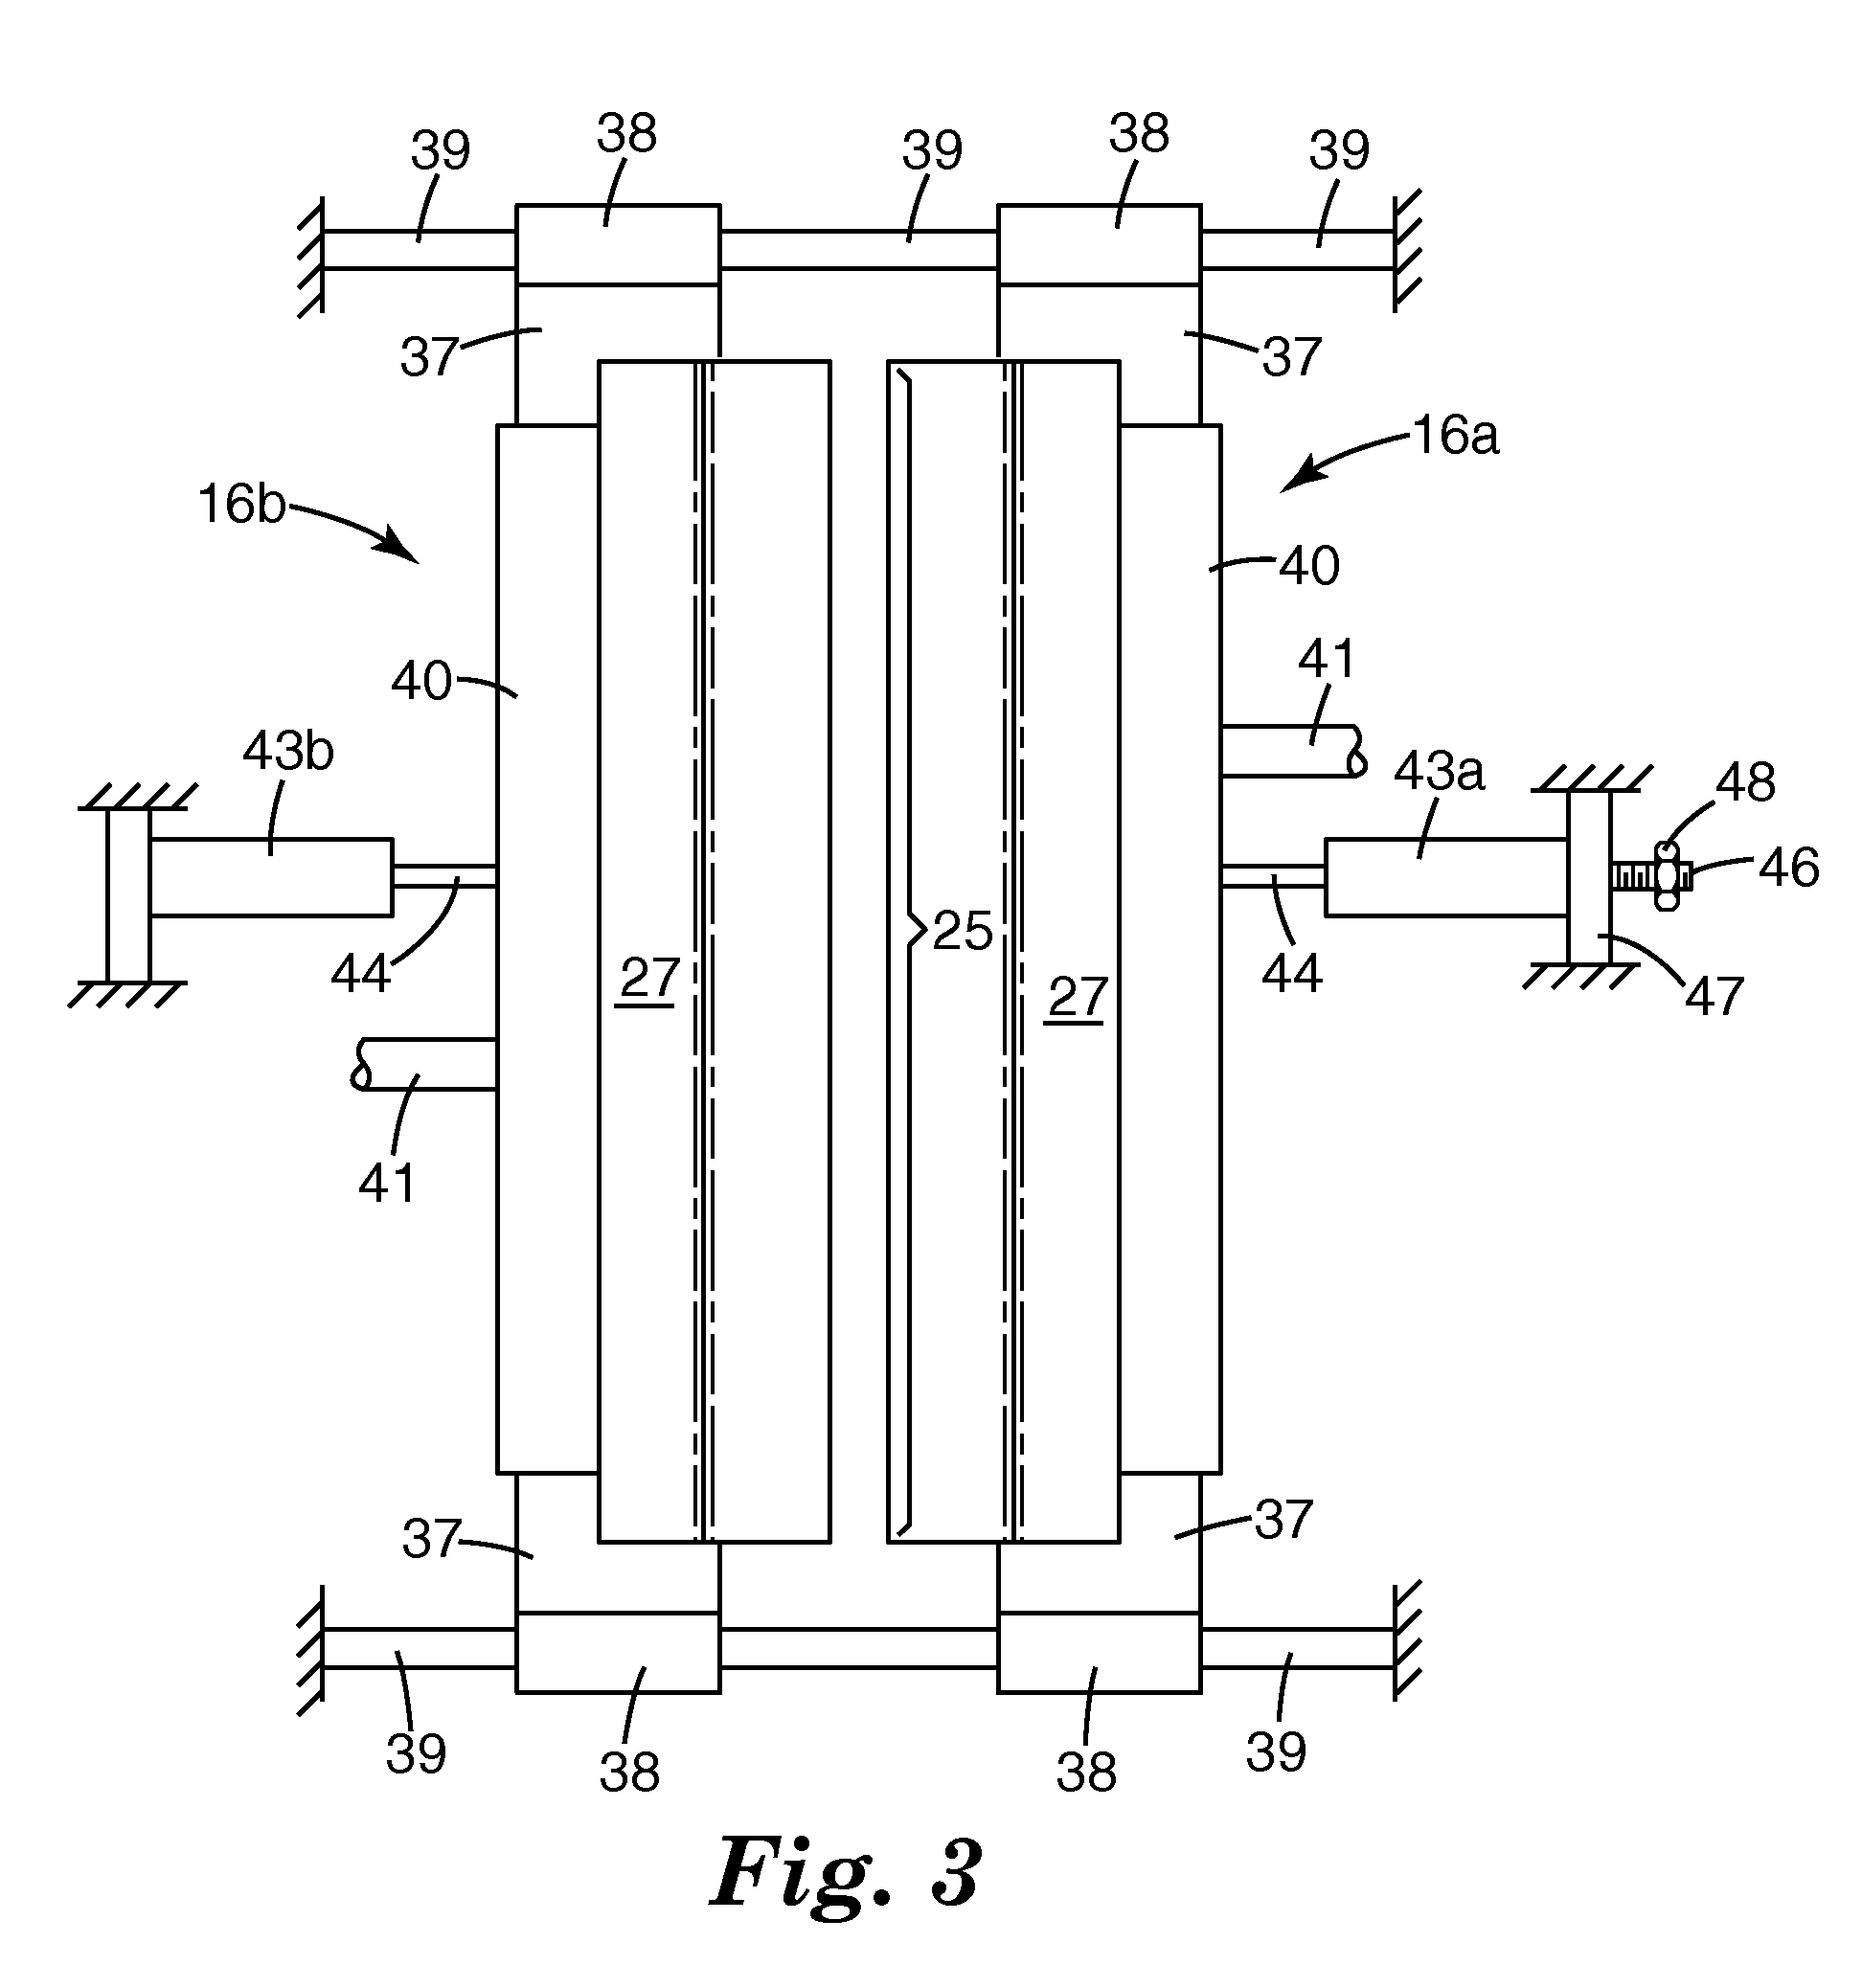 Bonded nonwoven fibrous webs comprising softenable oriented semicrystalline polymeric fibers and apparatus and methods for preparing such webs